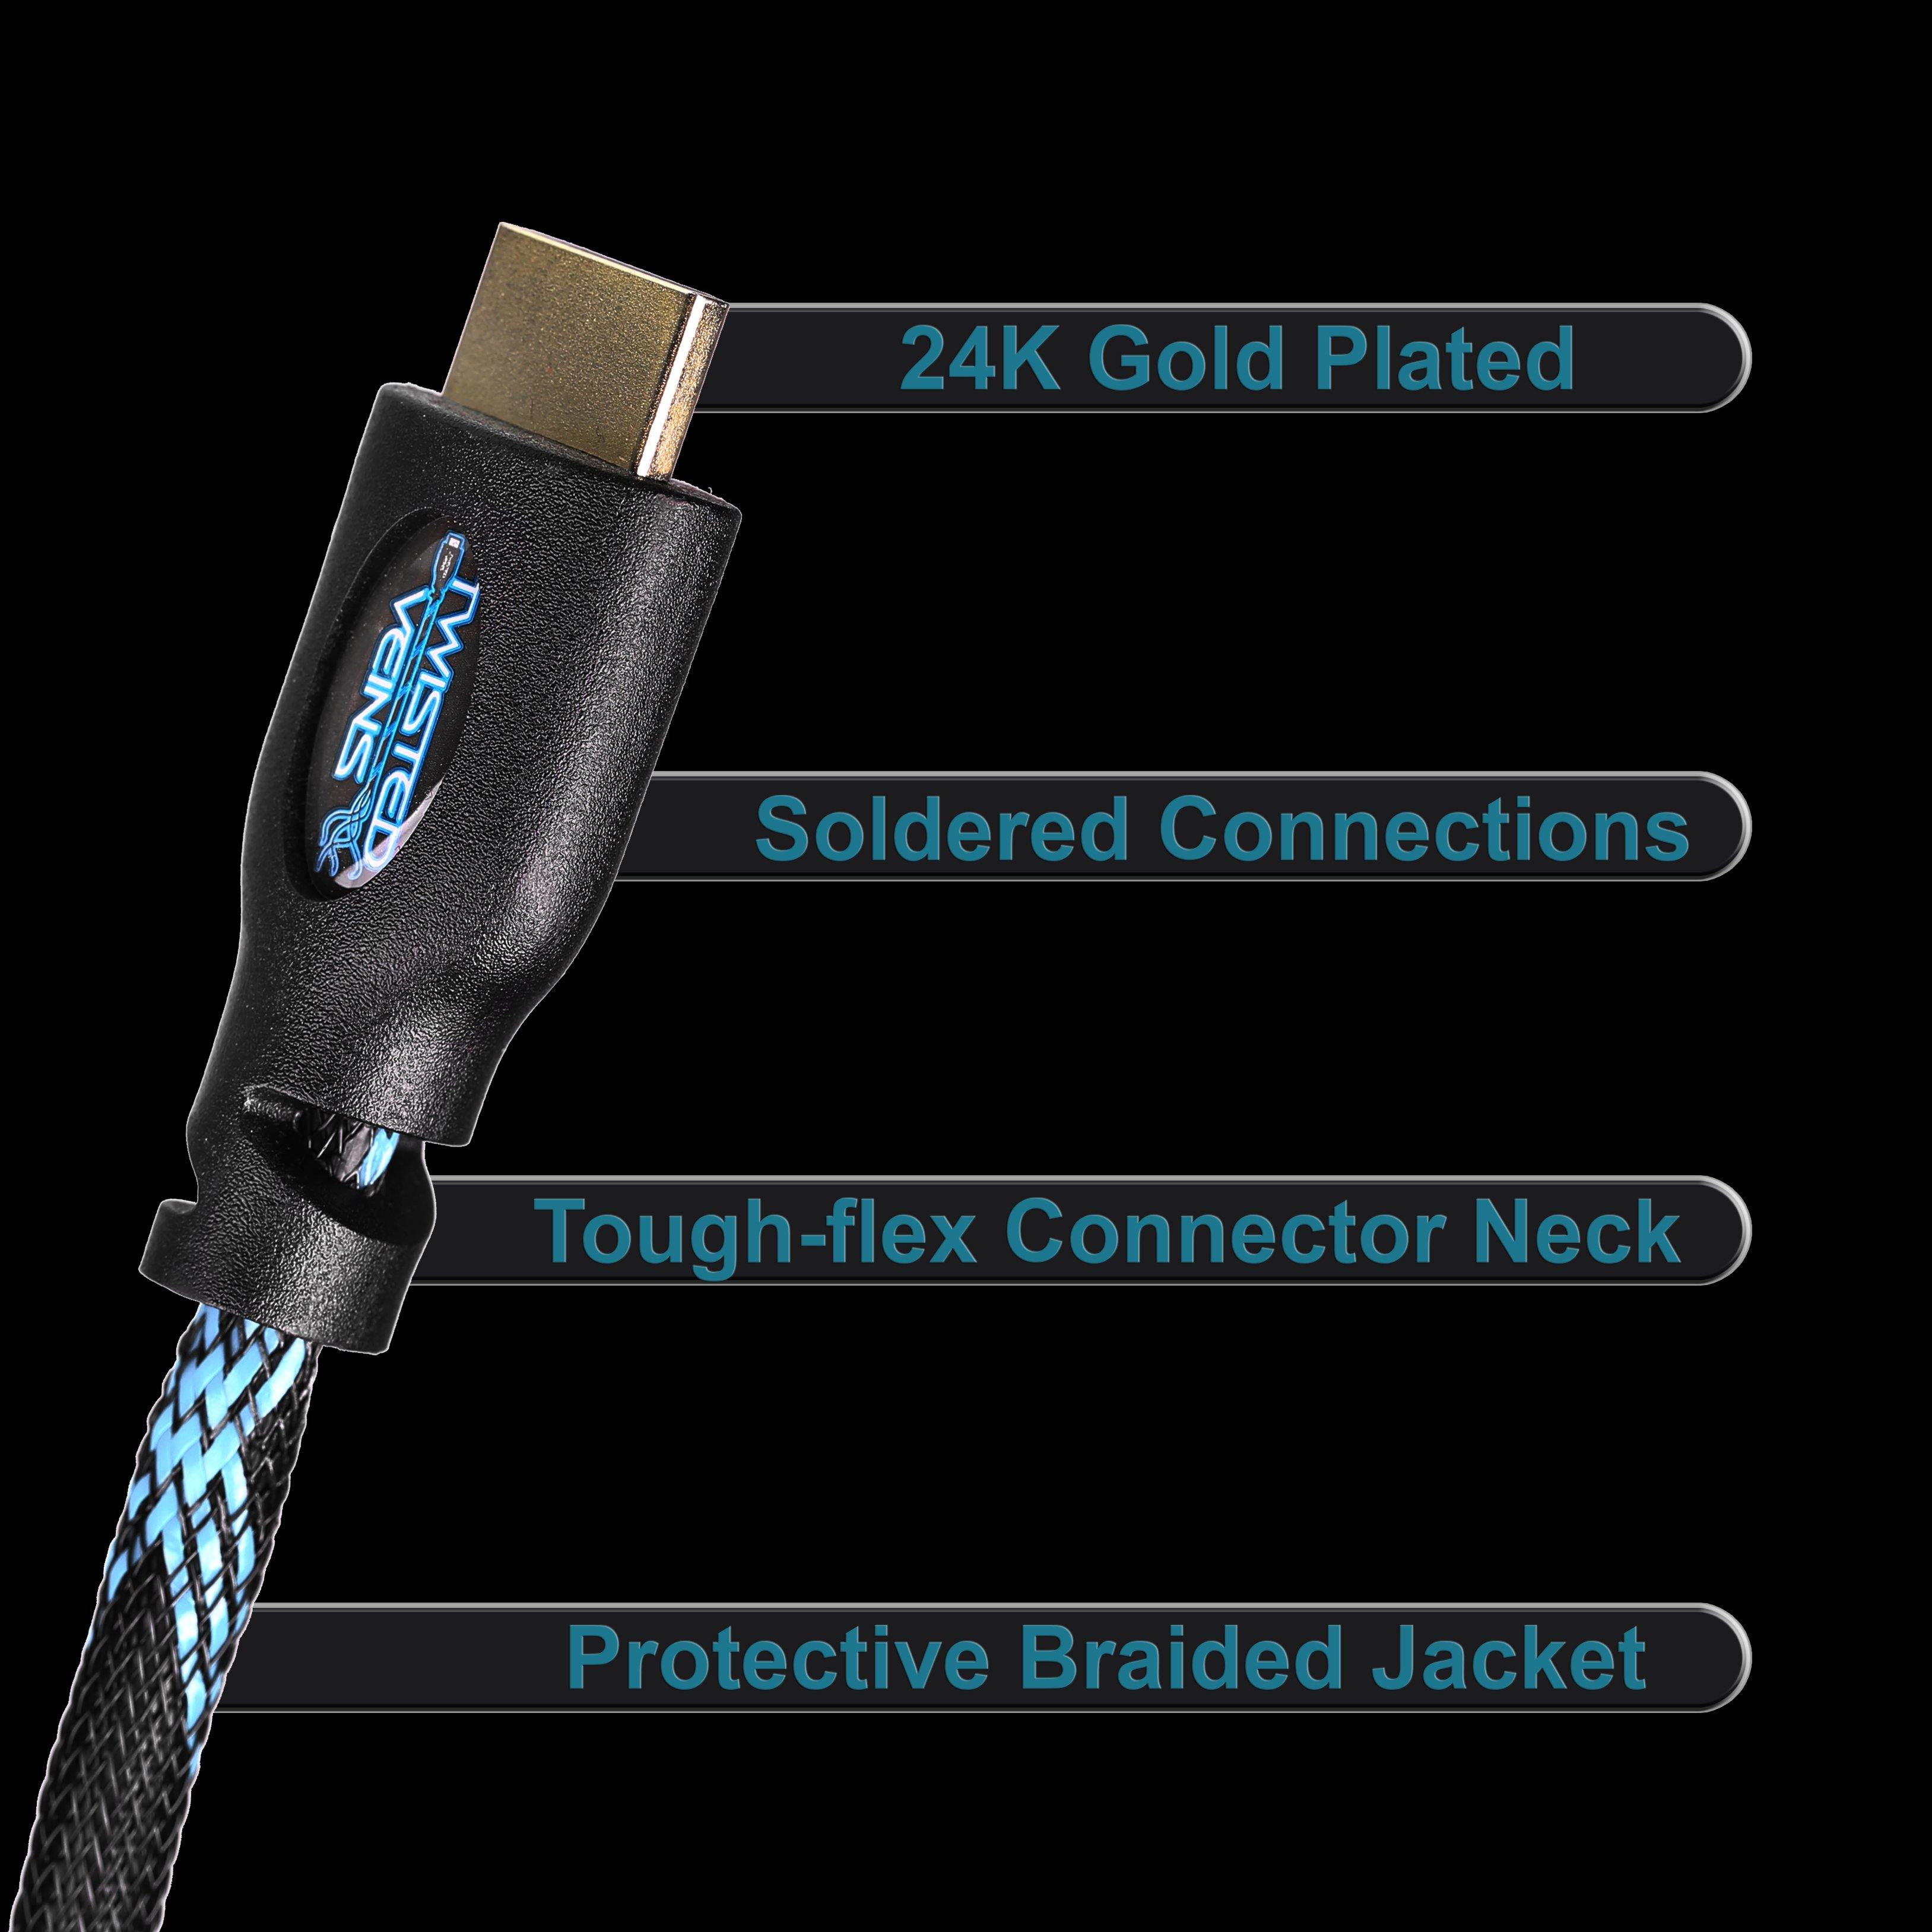 1 Pack Twisted Veins HDMI Cable - Twisted Veins